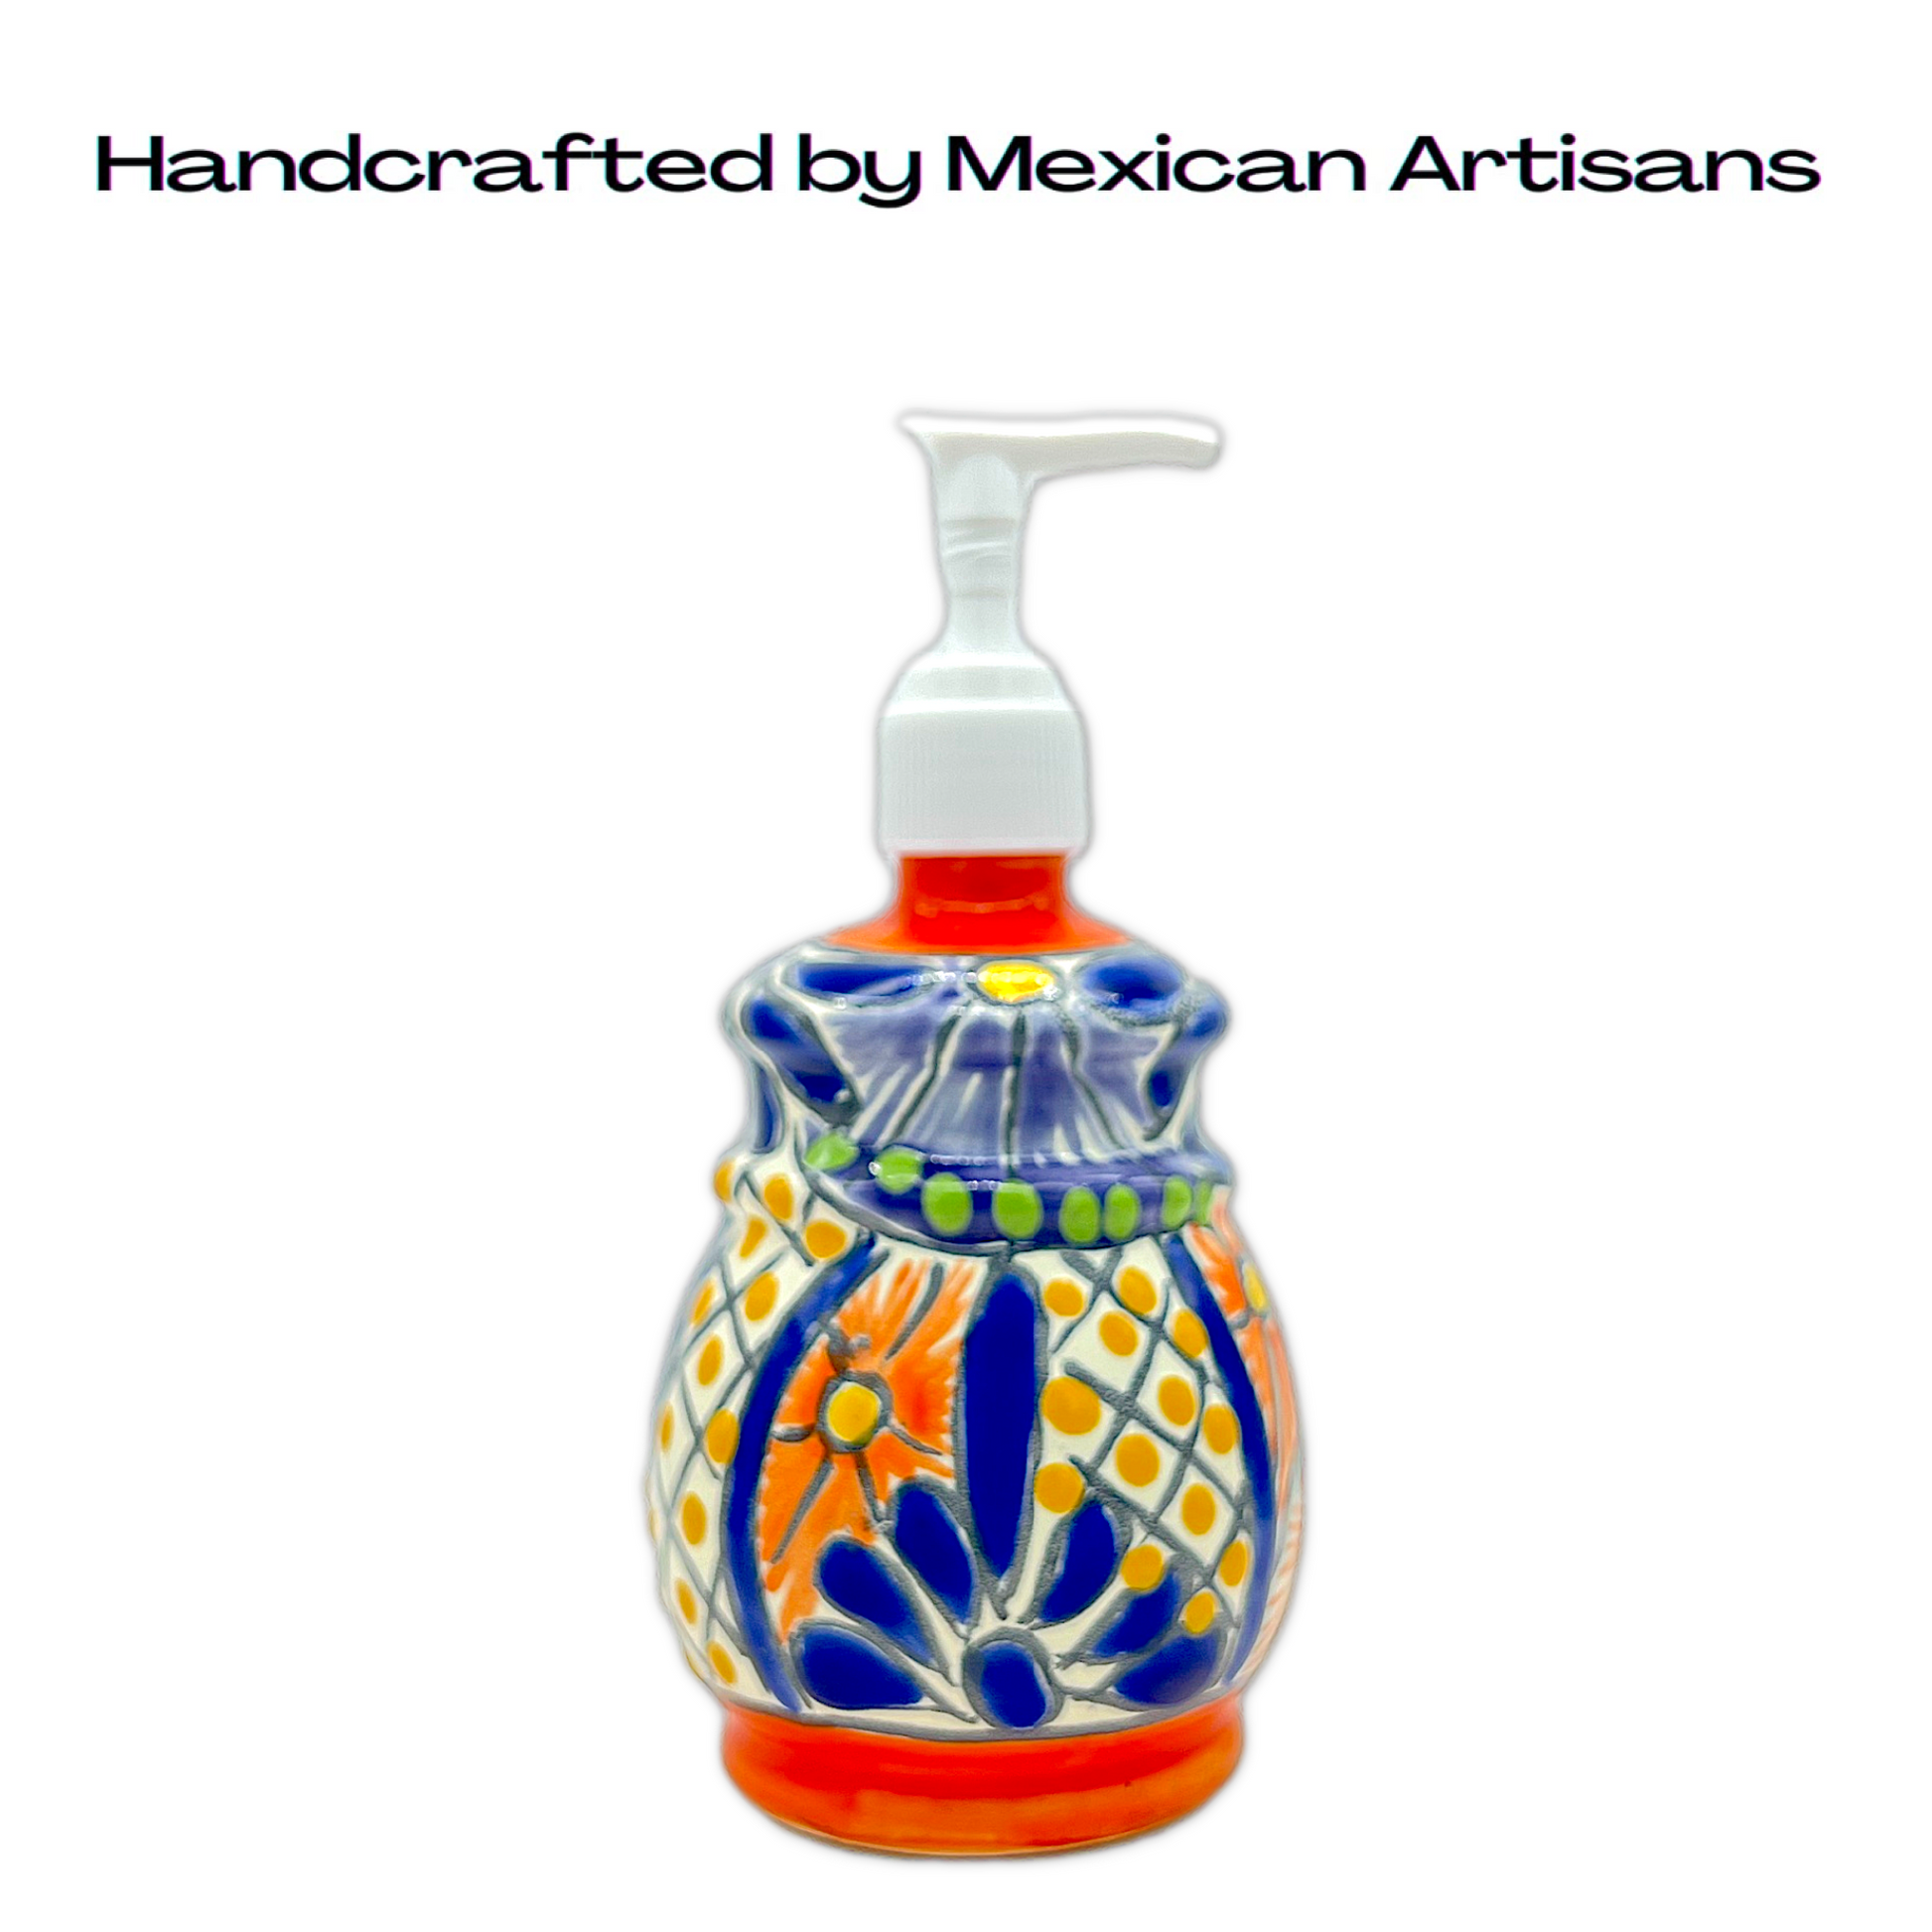 handcrafted by mexican artisans A multicolored, bell design, hand-painted Talavera ceramic soap dispenser sourced from skilled Mexican artisans.